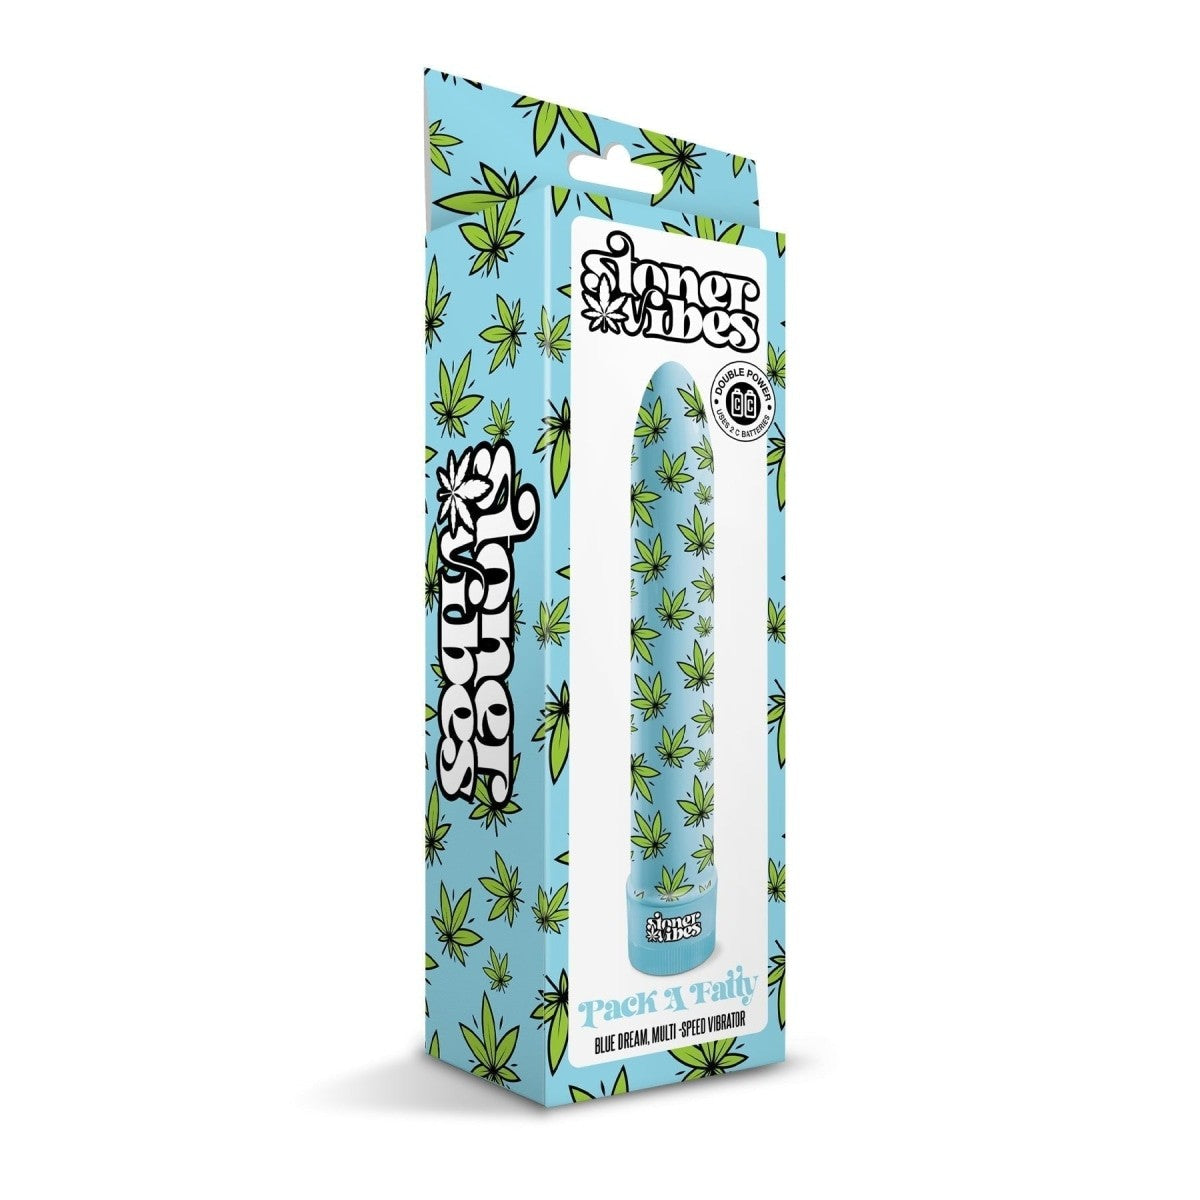 Stoner Vibes Pack A Fatty Blue Dream Intimates Adult Boutique